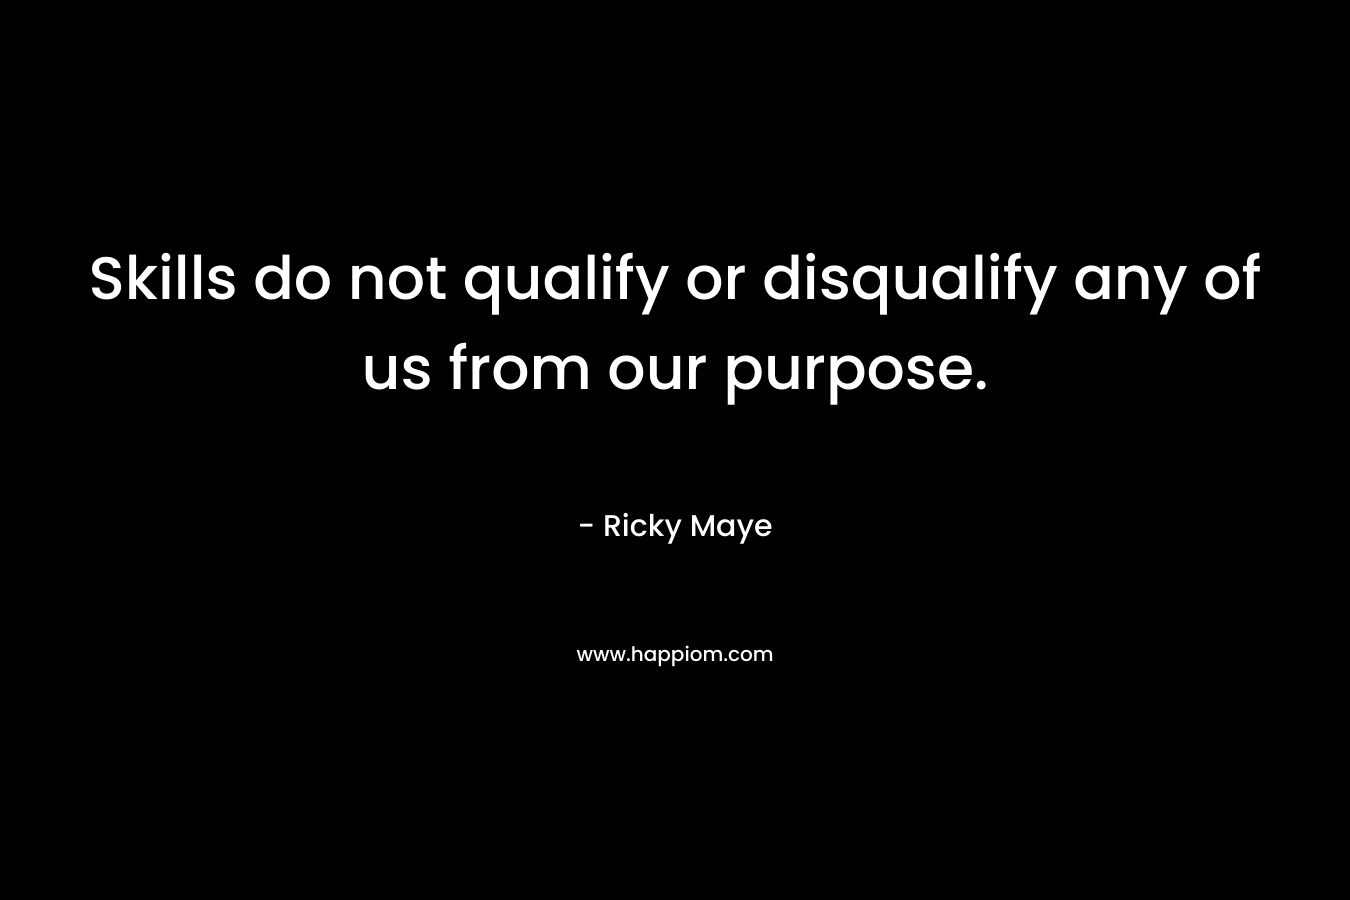 Skills do not qualify or disqualify any of us from our purpose.